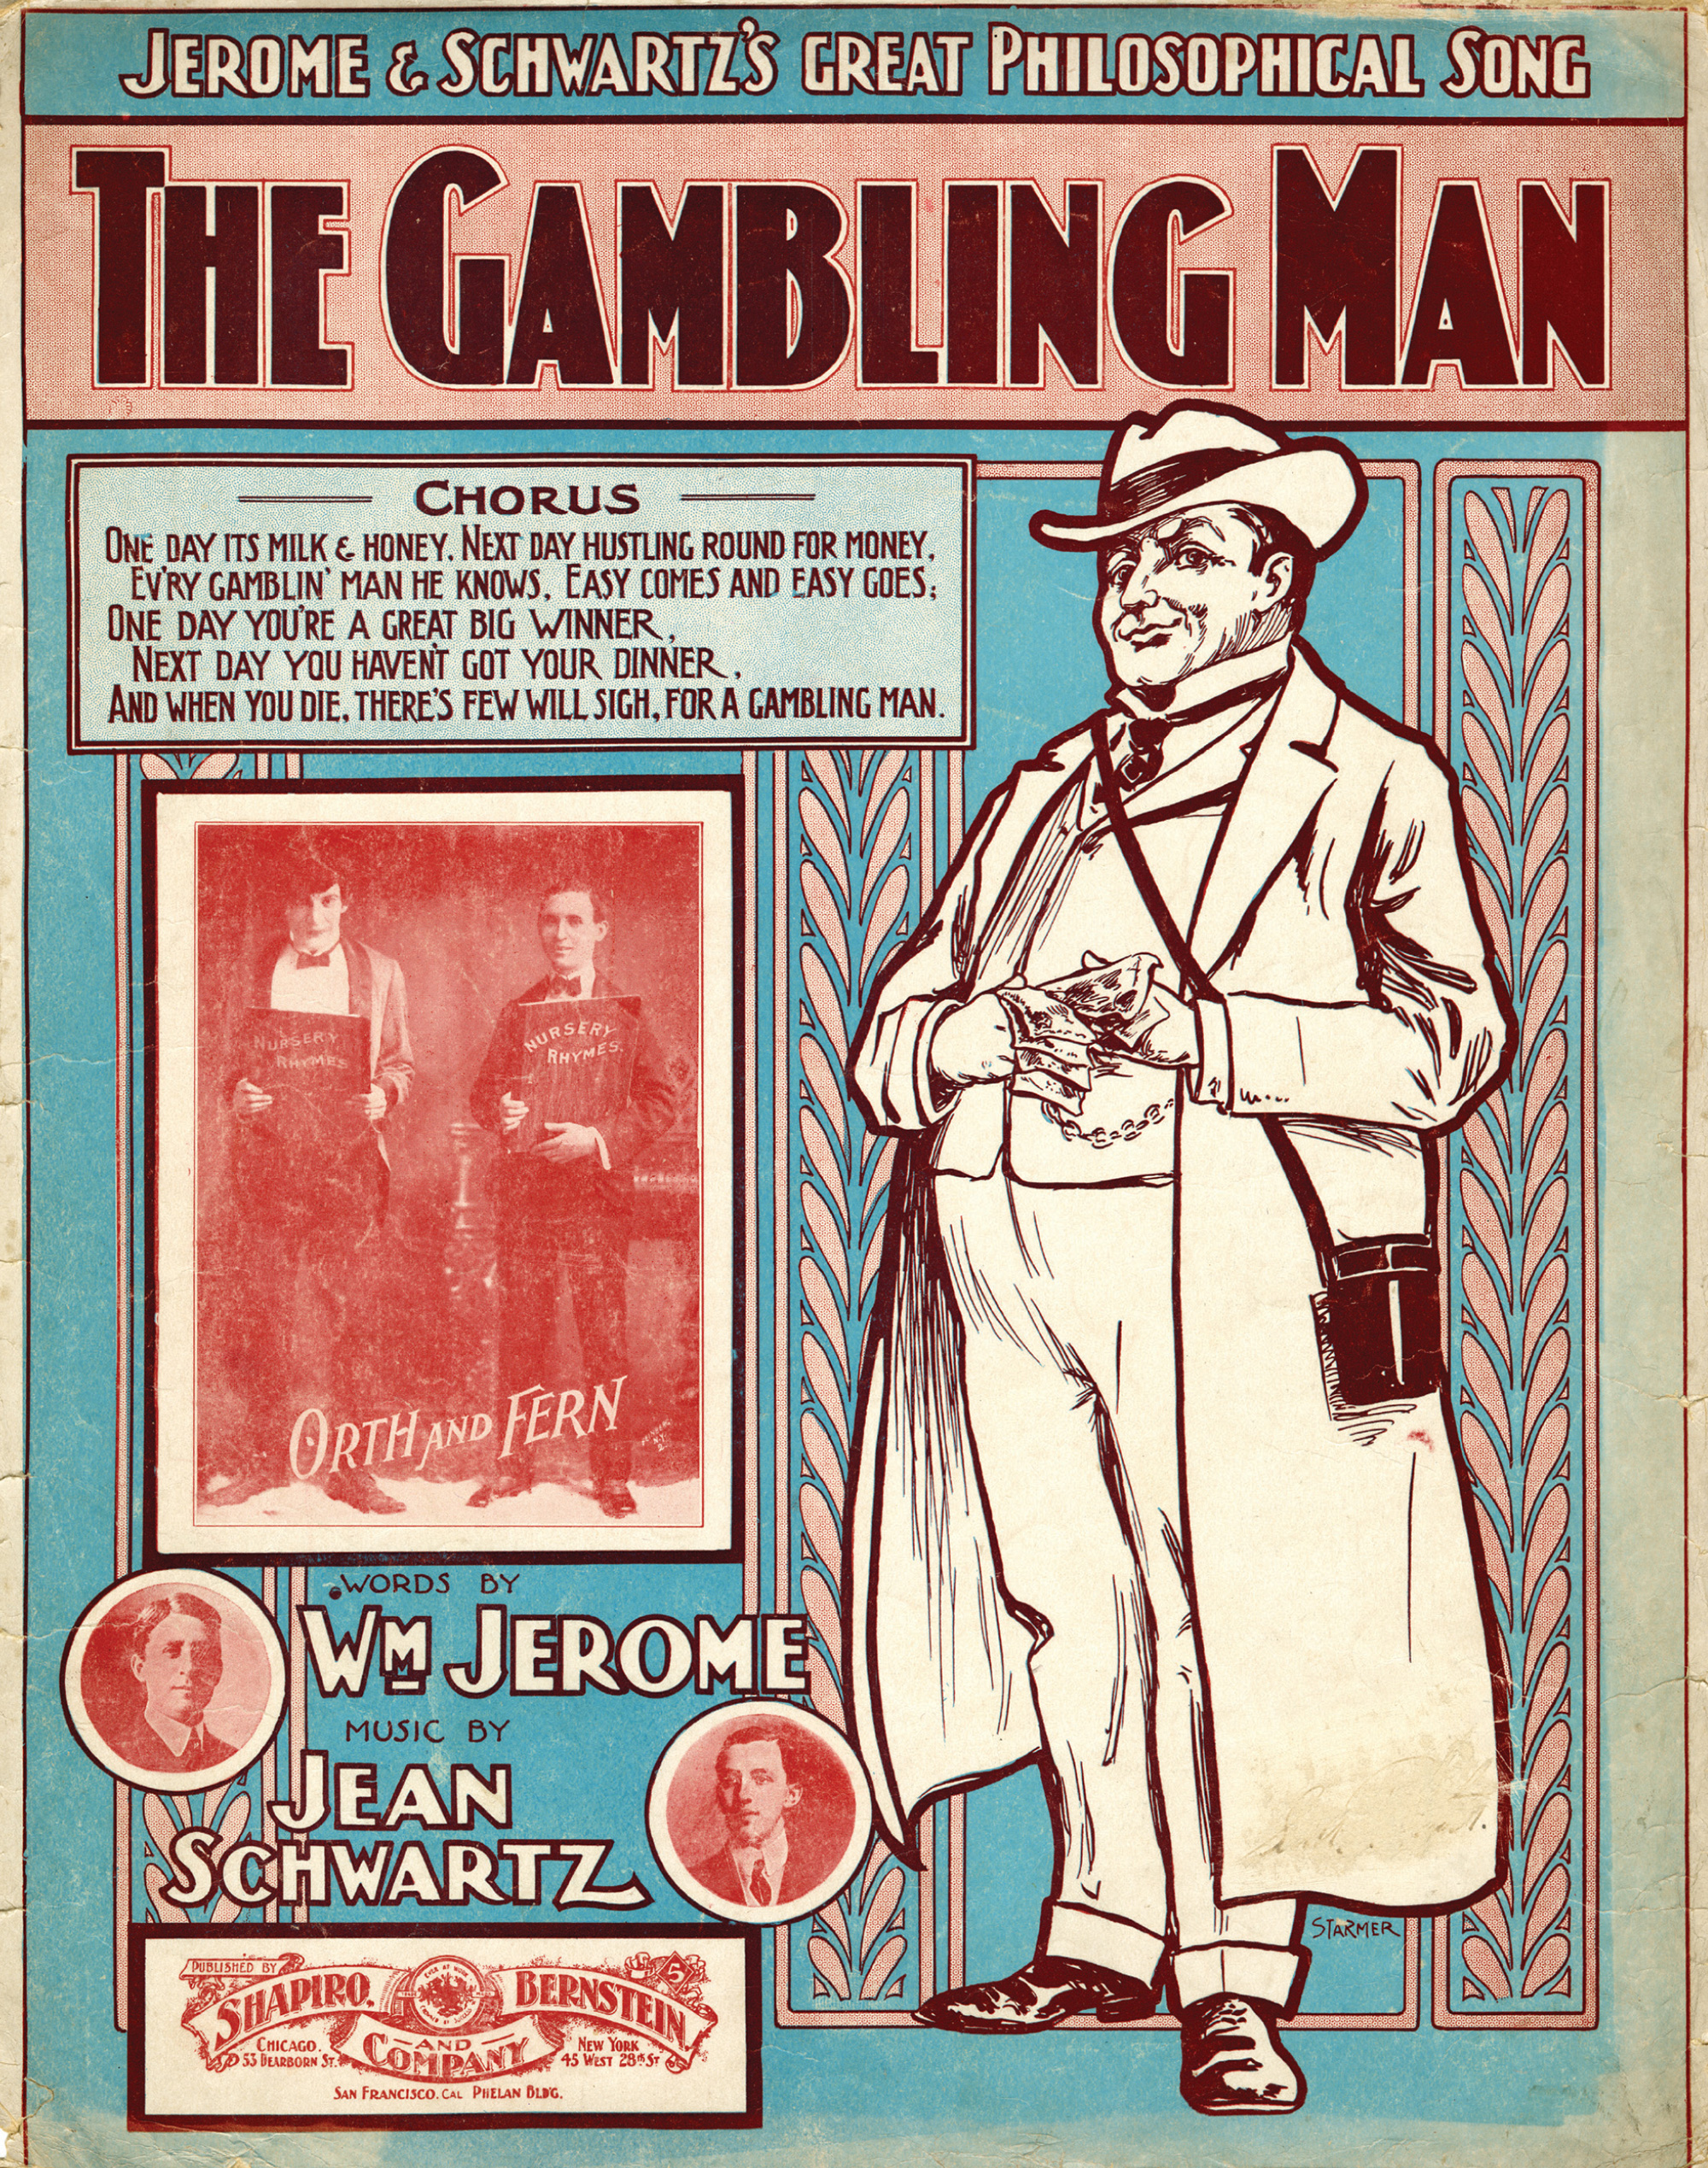 Sheet Music for the “The Gambling Man,” 1902. Courtesy Sam DeVincent Collection of Illustrated American Sheet Music, Archives Center, National Museum of American History, Smithonian Institution.